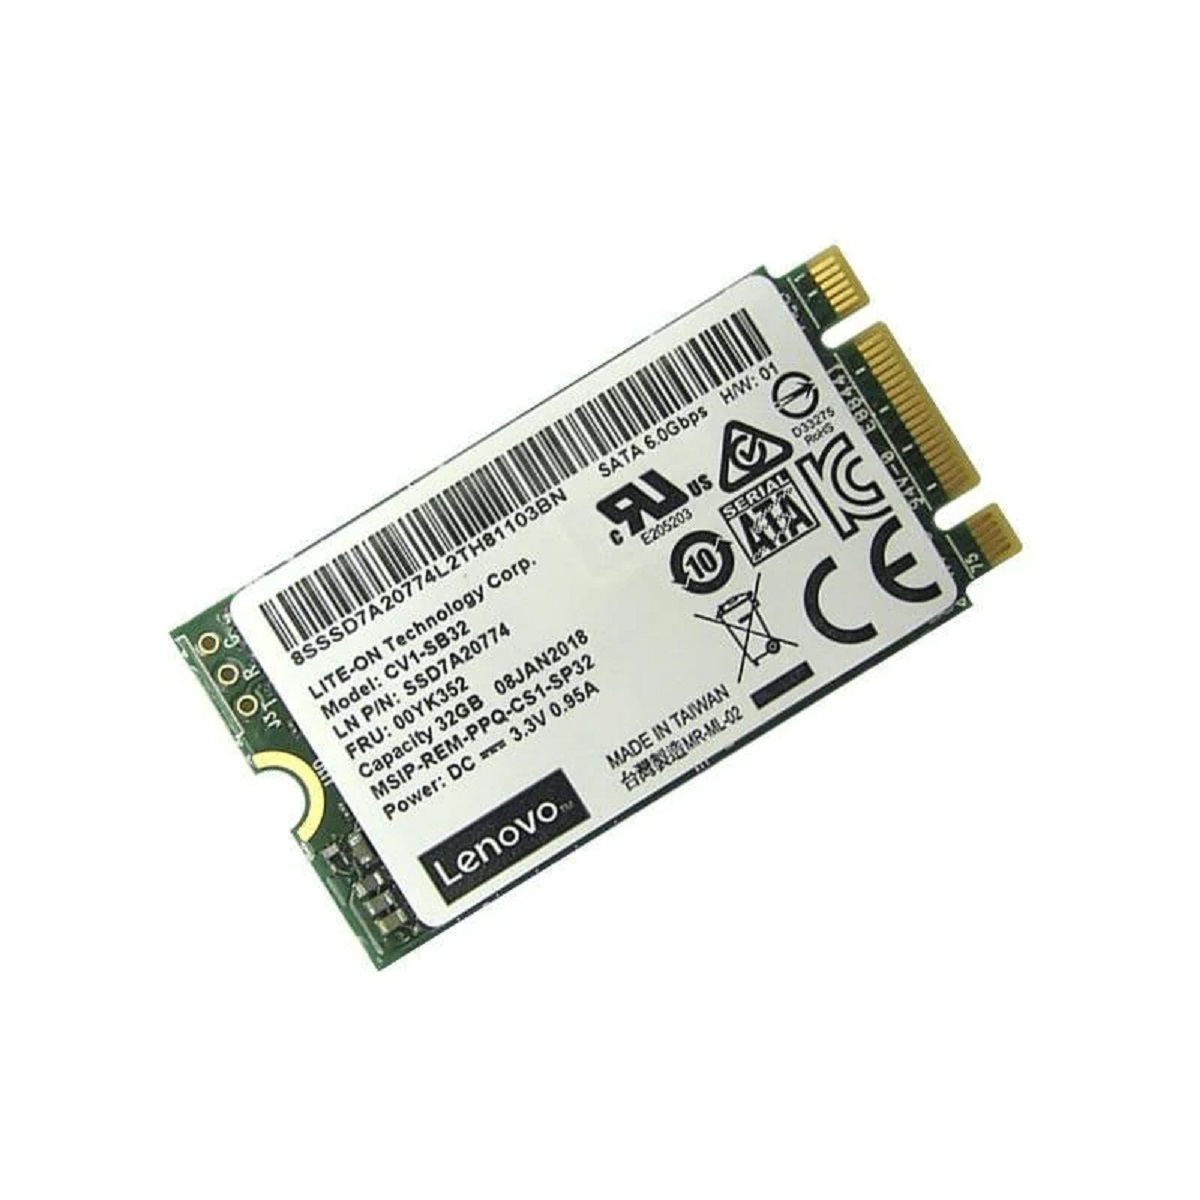 What Is A 32GB EMMC Solid State Drive